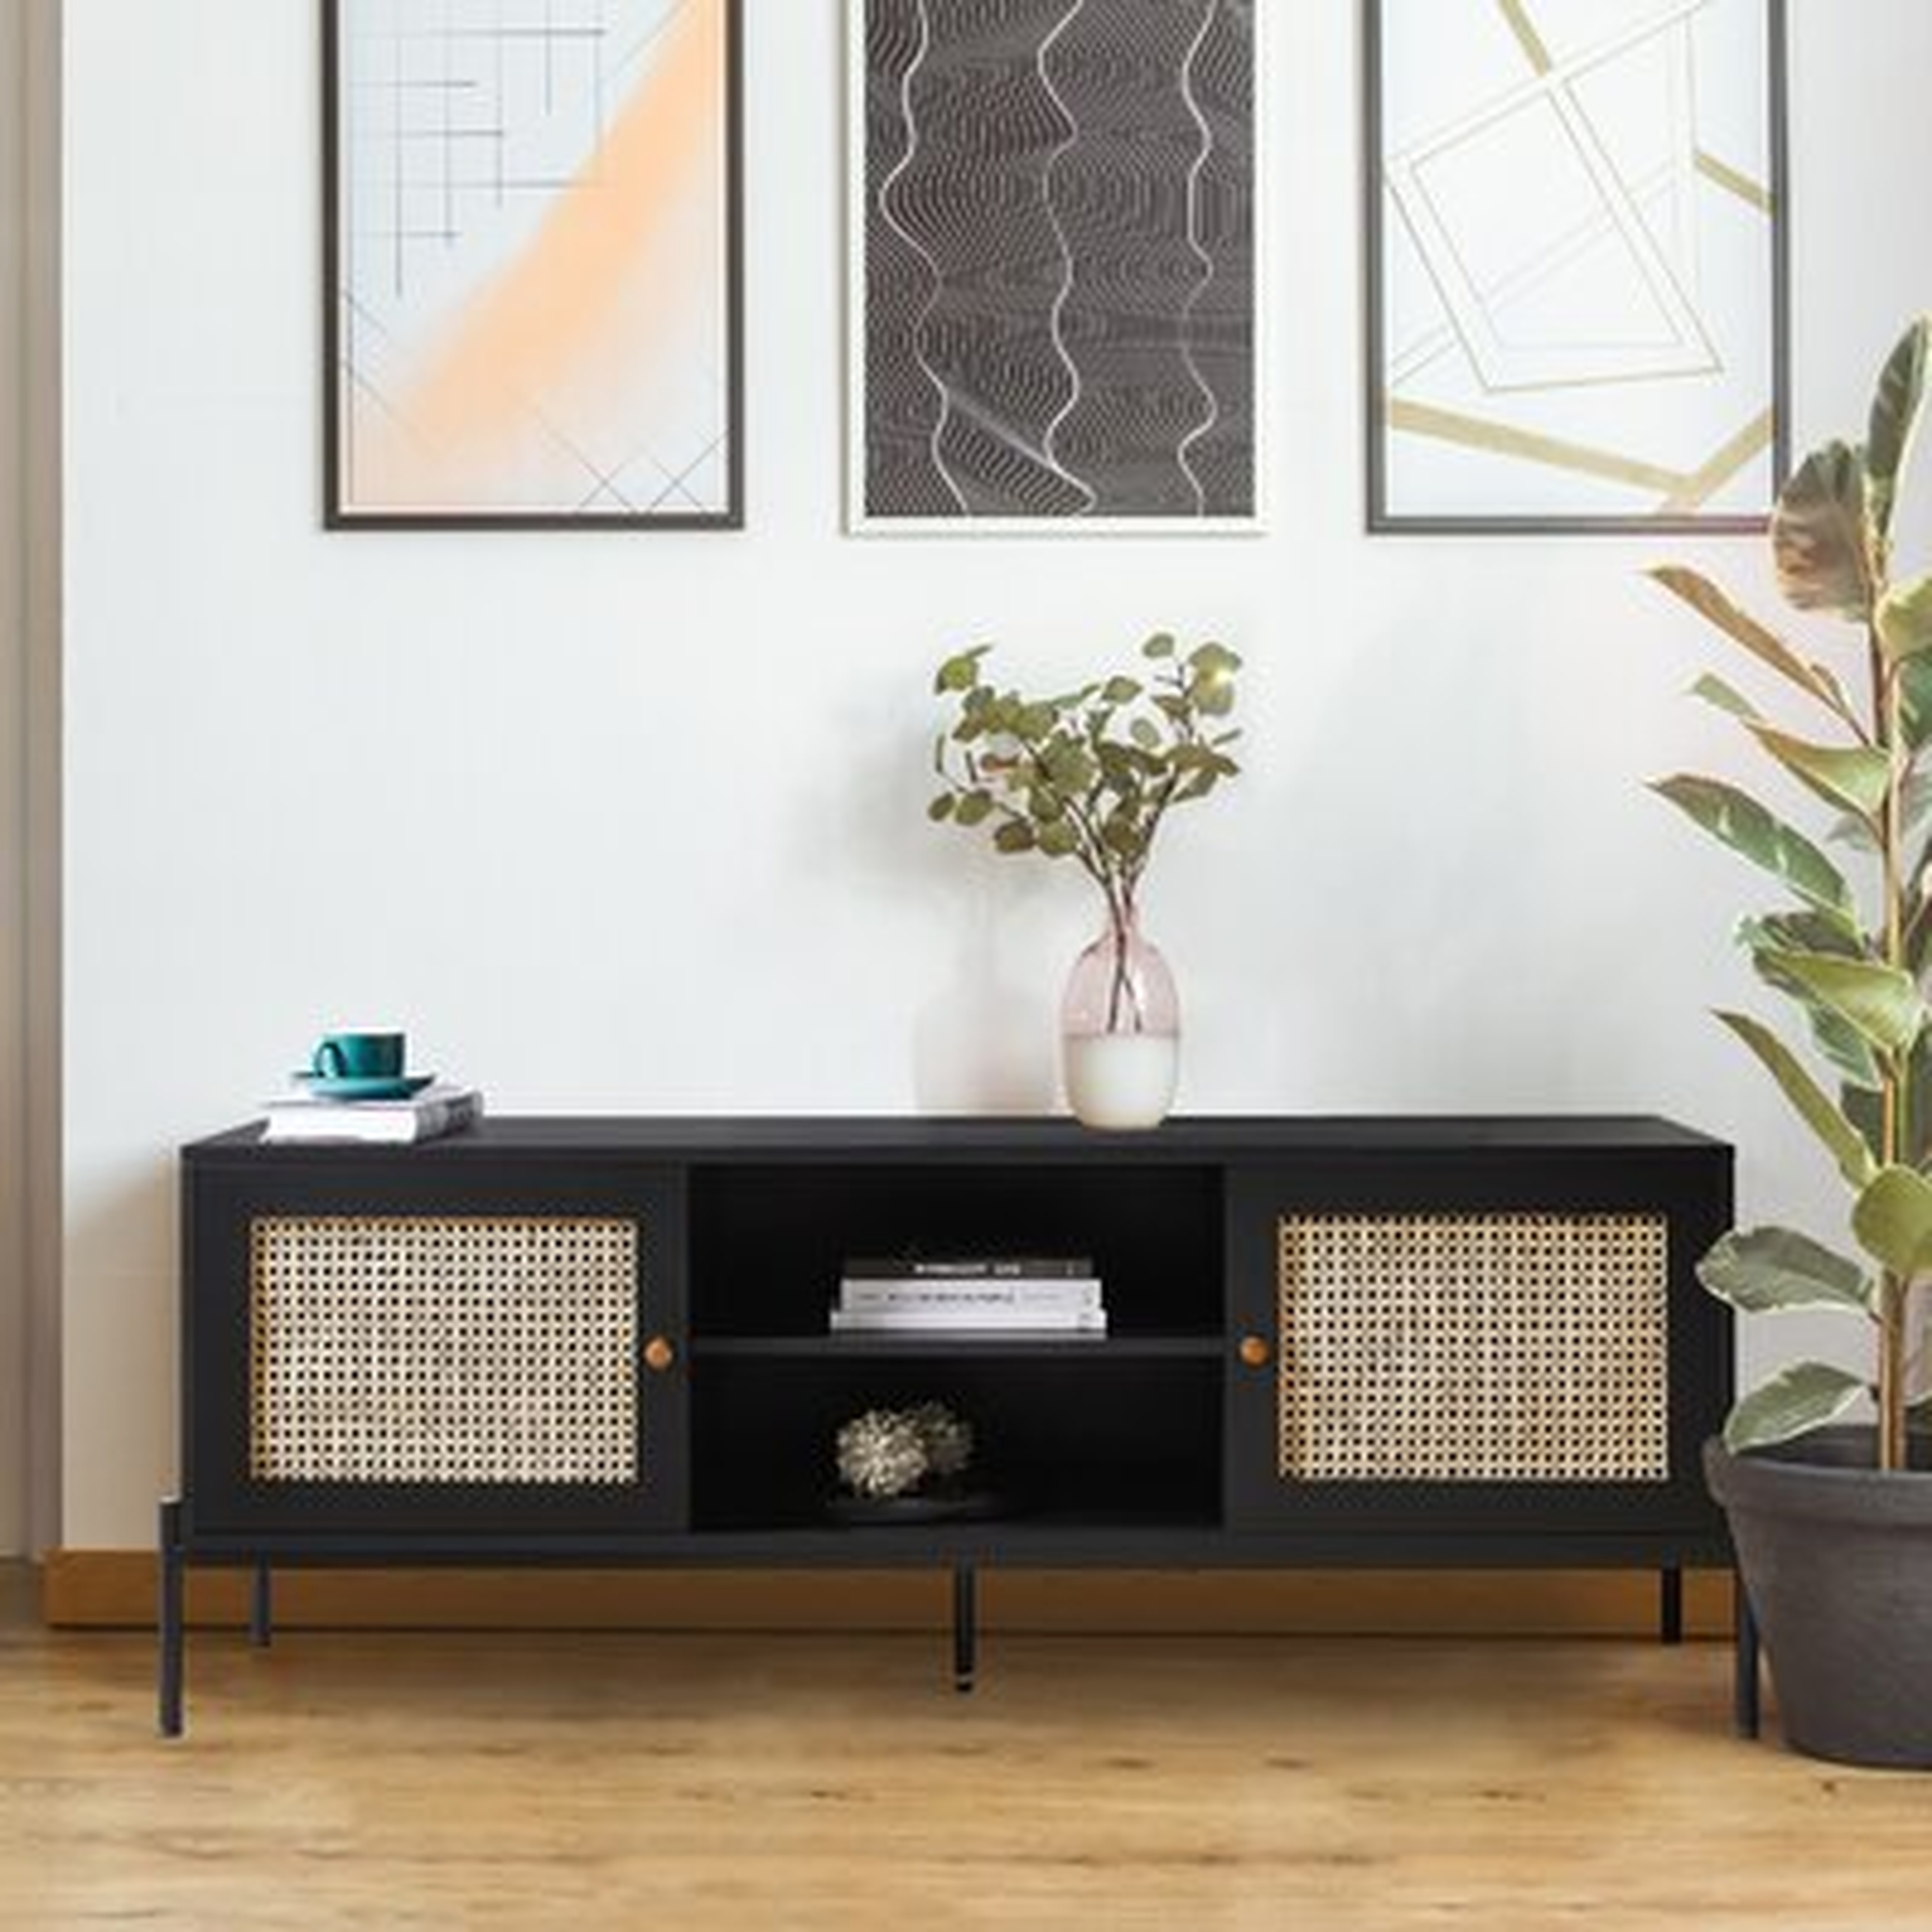 Lewis 62 Inches Tv Stand With 2 Baskets Storage,Black (in stock Nov,15,2021) - Wayfair